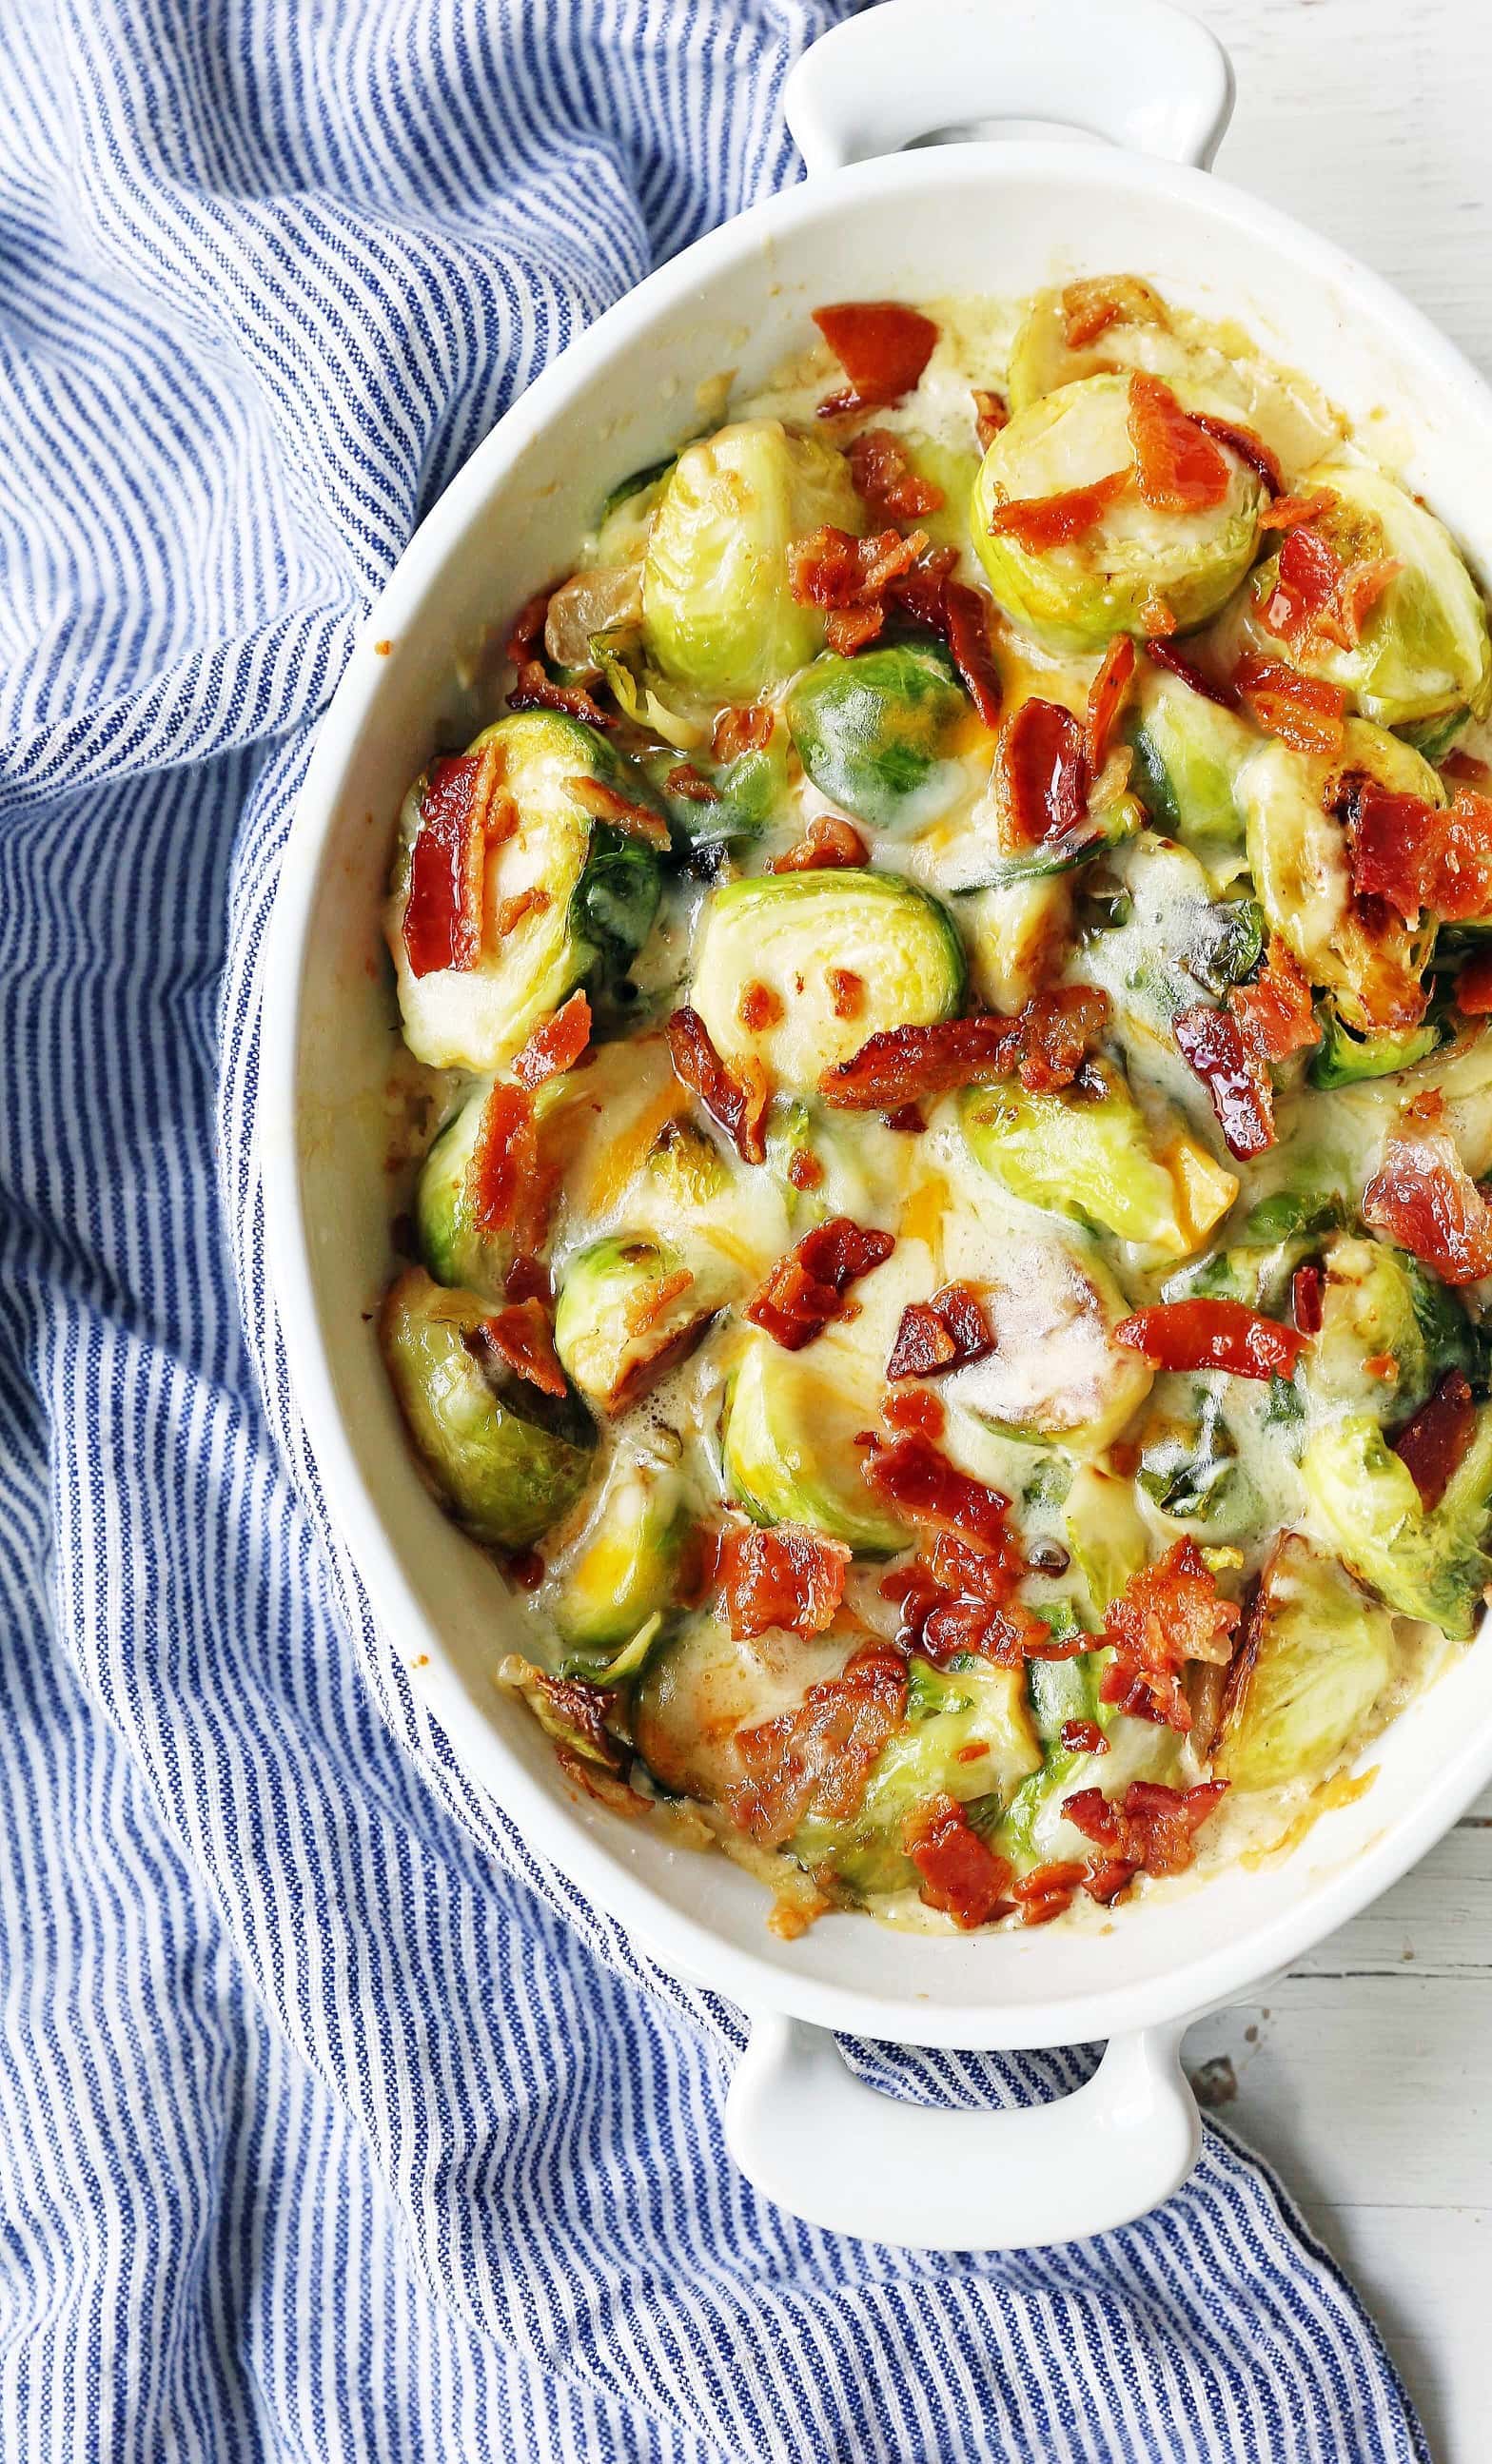 Creamy Cheesy Brussels Sprouts with Bacon. Roasted brussels sprouts with crispy bacon, a creamy sauce, and melted cheese. www.modernhoney.com #brusselsprouts #brusselsprouts #sidedish #vegetables 